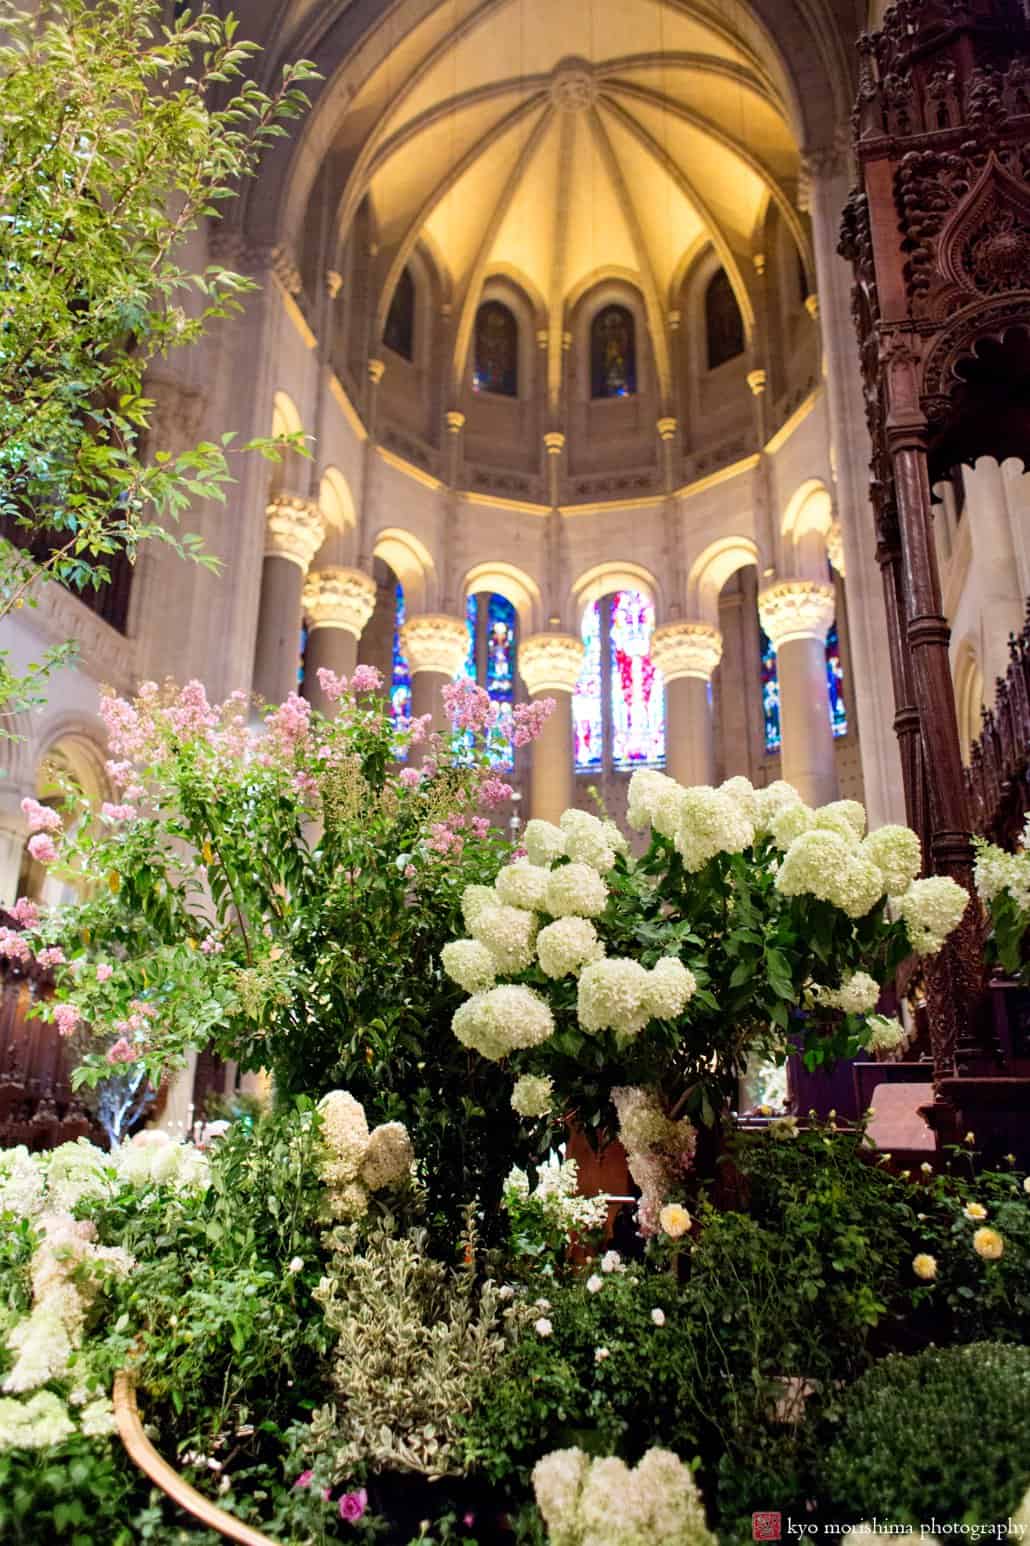 A view of the St. John the Divine chapel decorated with flowering shrubs for a wedding, photographed by Kyo Morishima